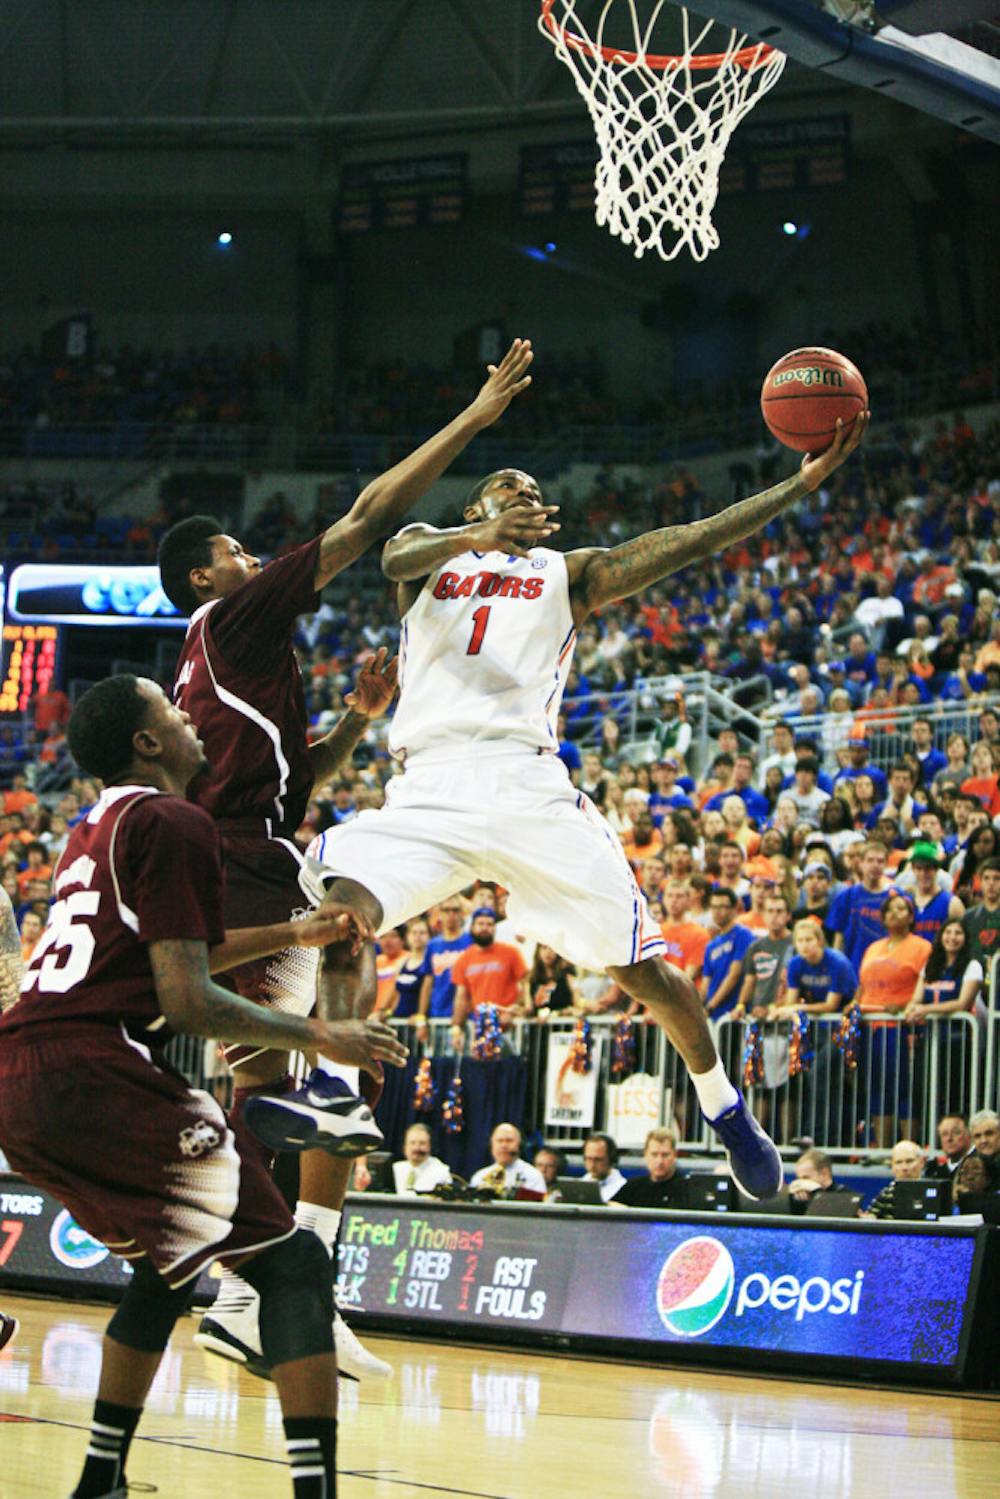 <p><span>Kenny Boynton (1) attempts a shot during Florida’s 83-58 win against Mississippi State on Saturday.</span></p>
<div><span><br /></span></div>